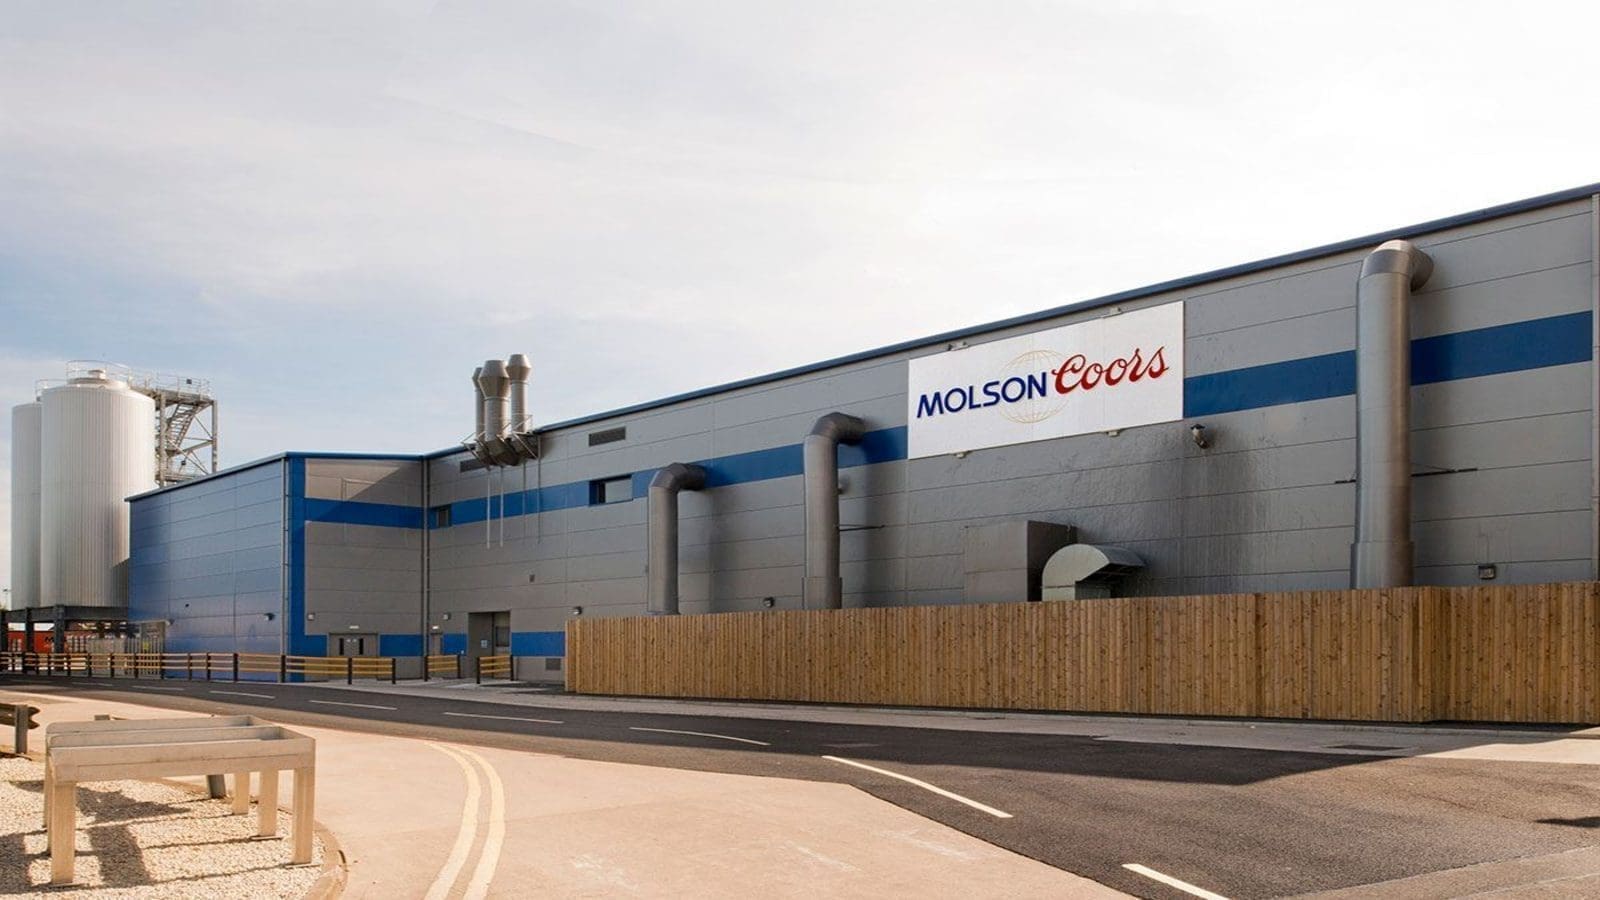 Molson Coors expands capacity at UK facility to drive efficiency and enhance sustainability